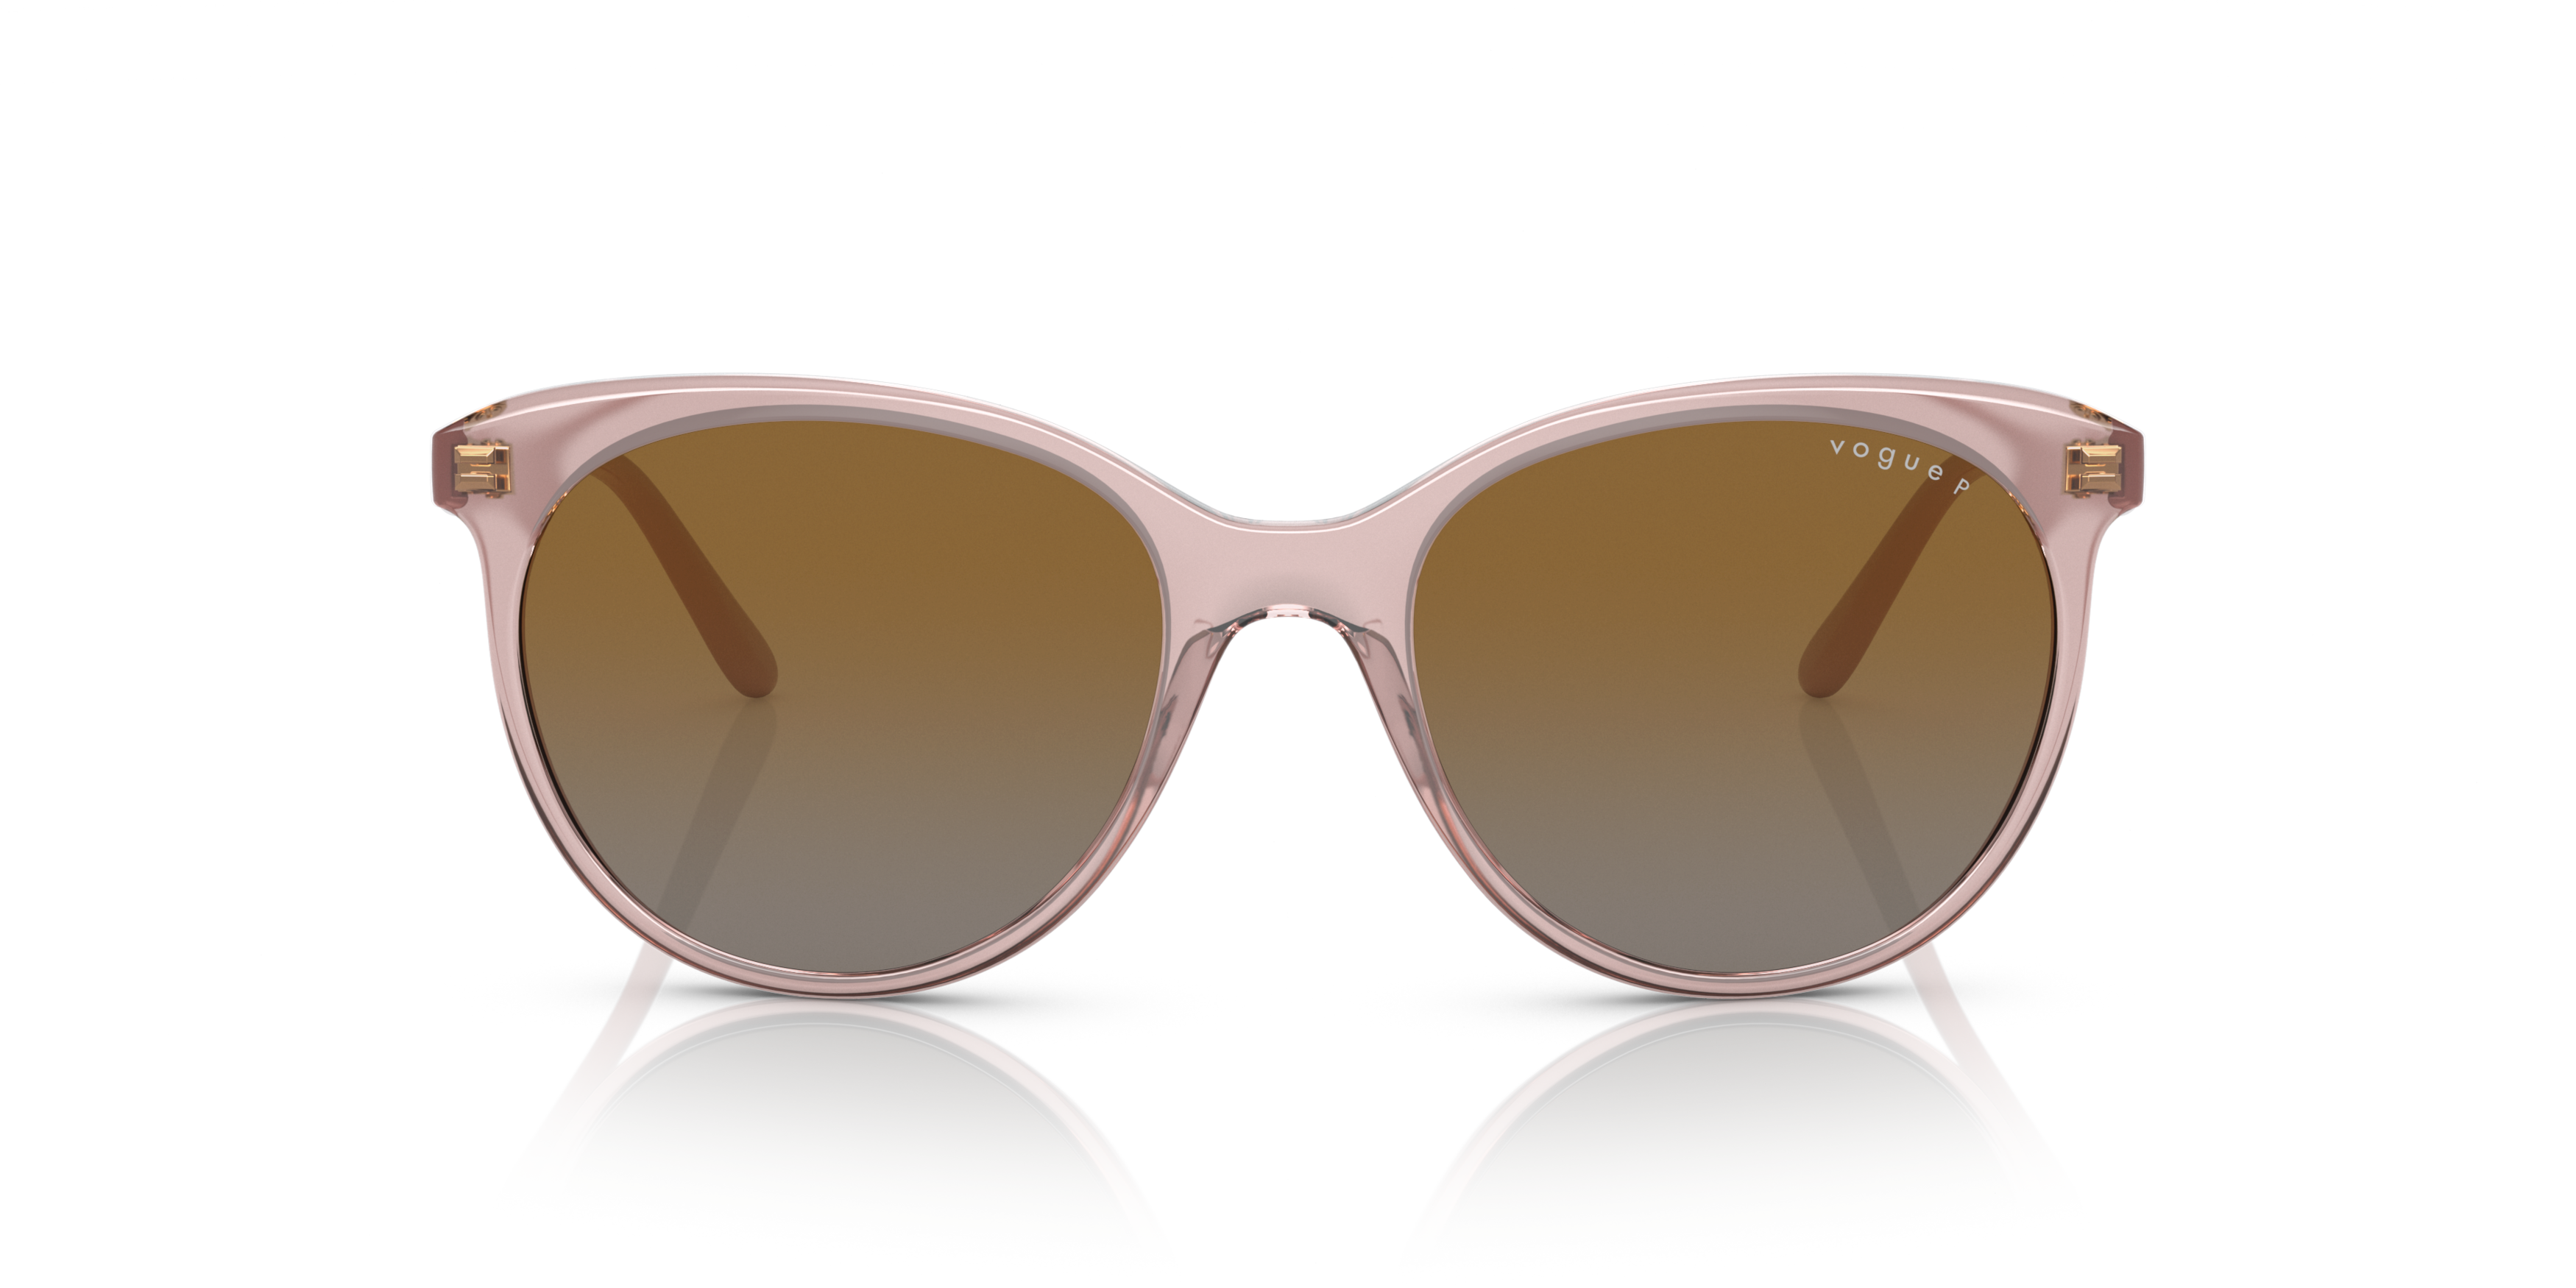 [products.image.front] Vogue VO 5453S Sunglasses